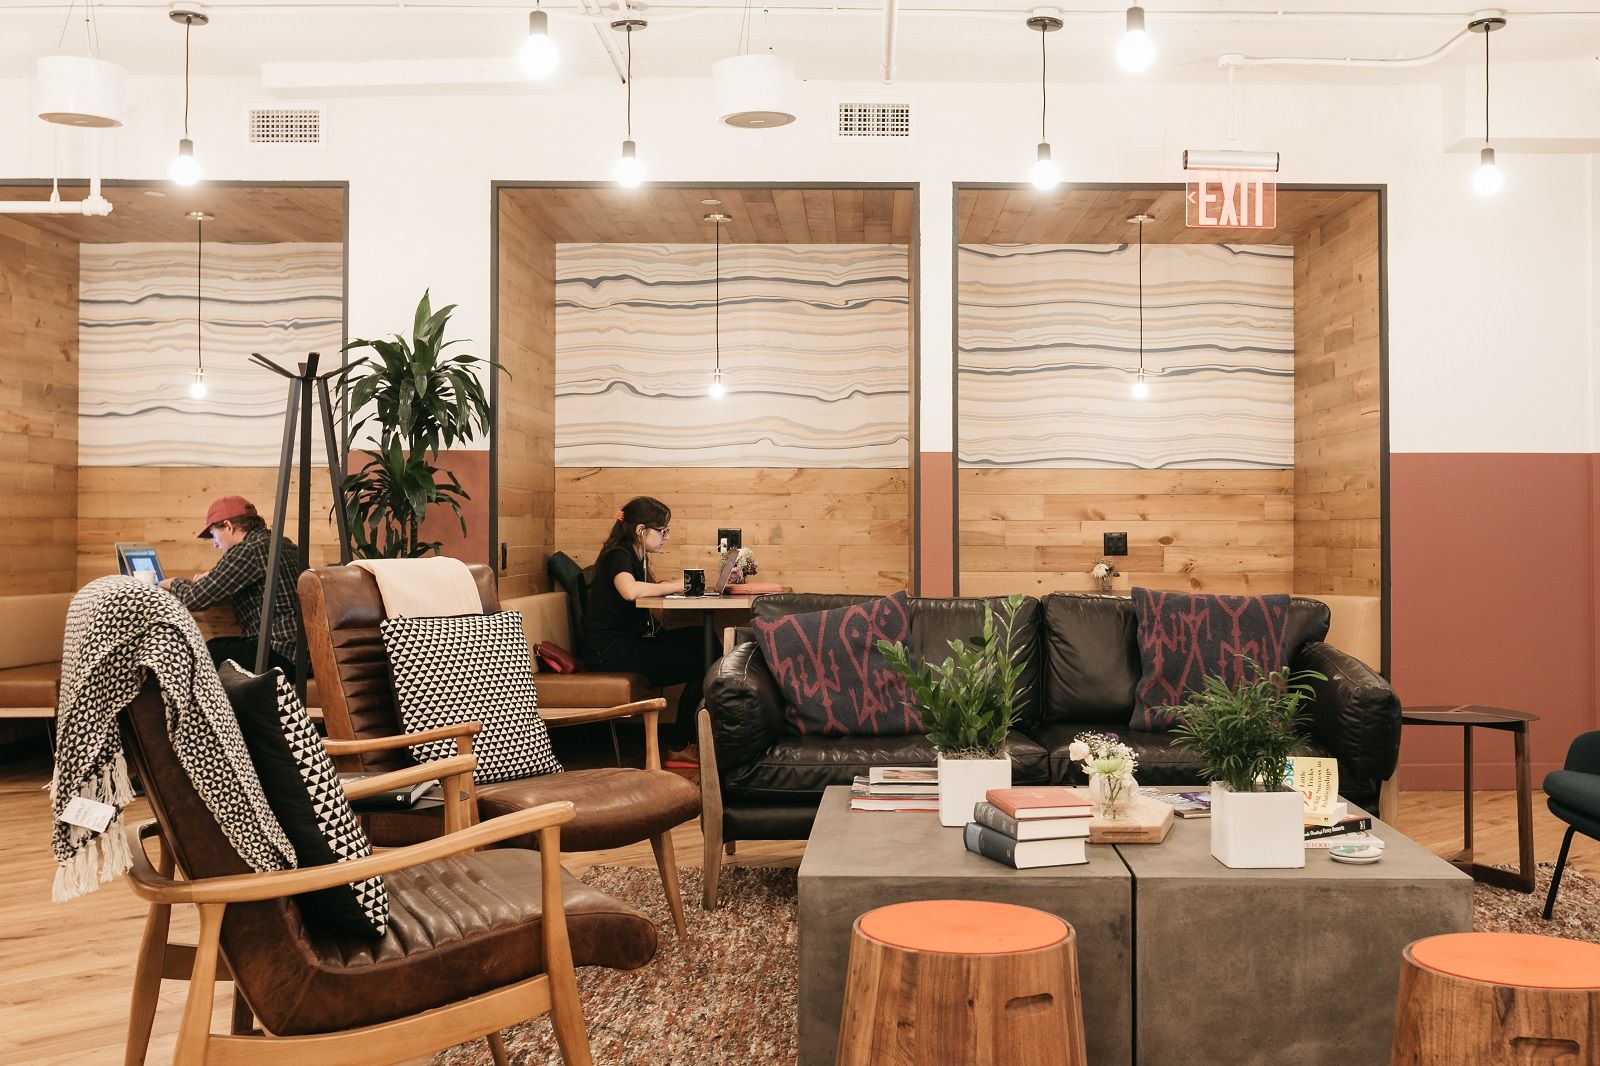 This photo shows a stock photo of a WeWork space. (Courtesy WeWork)